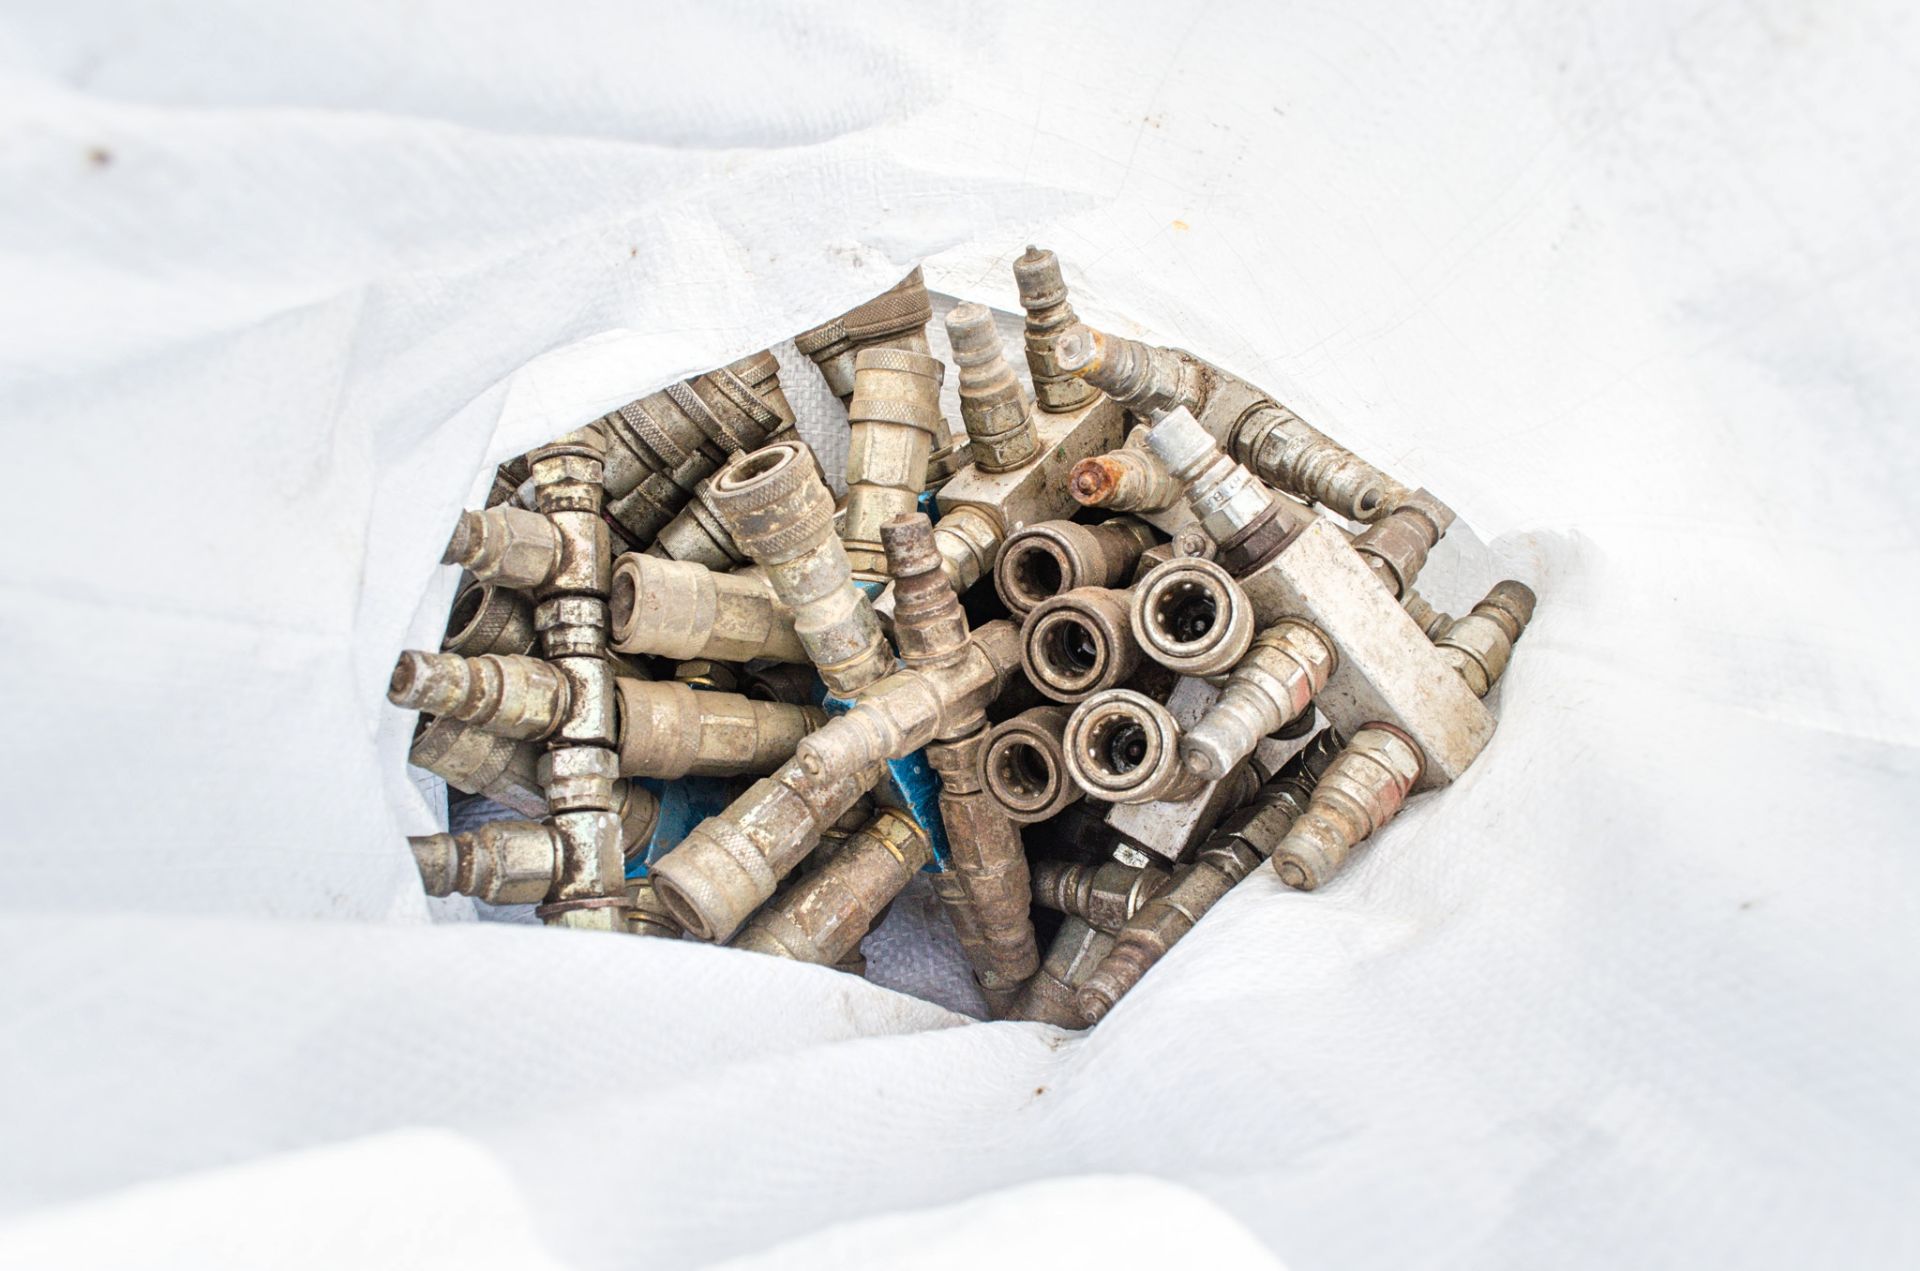 Stillage of hydraulic hoses & bag of fittings - Image 2 of 2